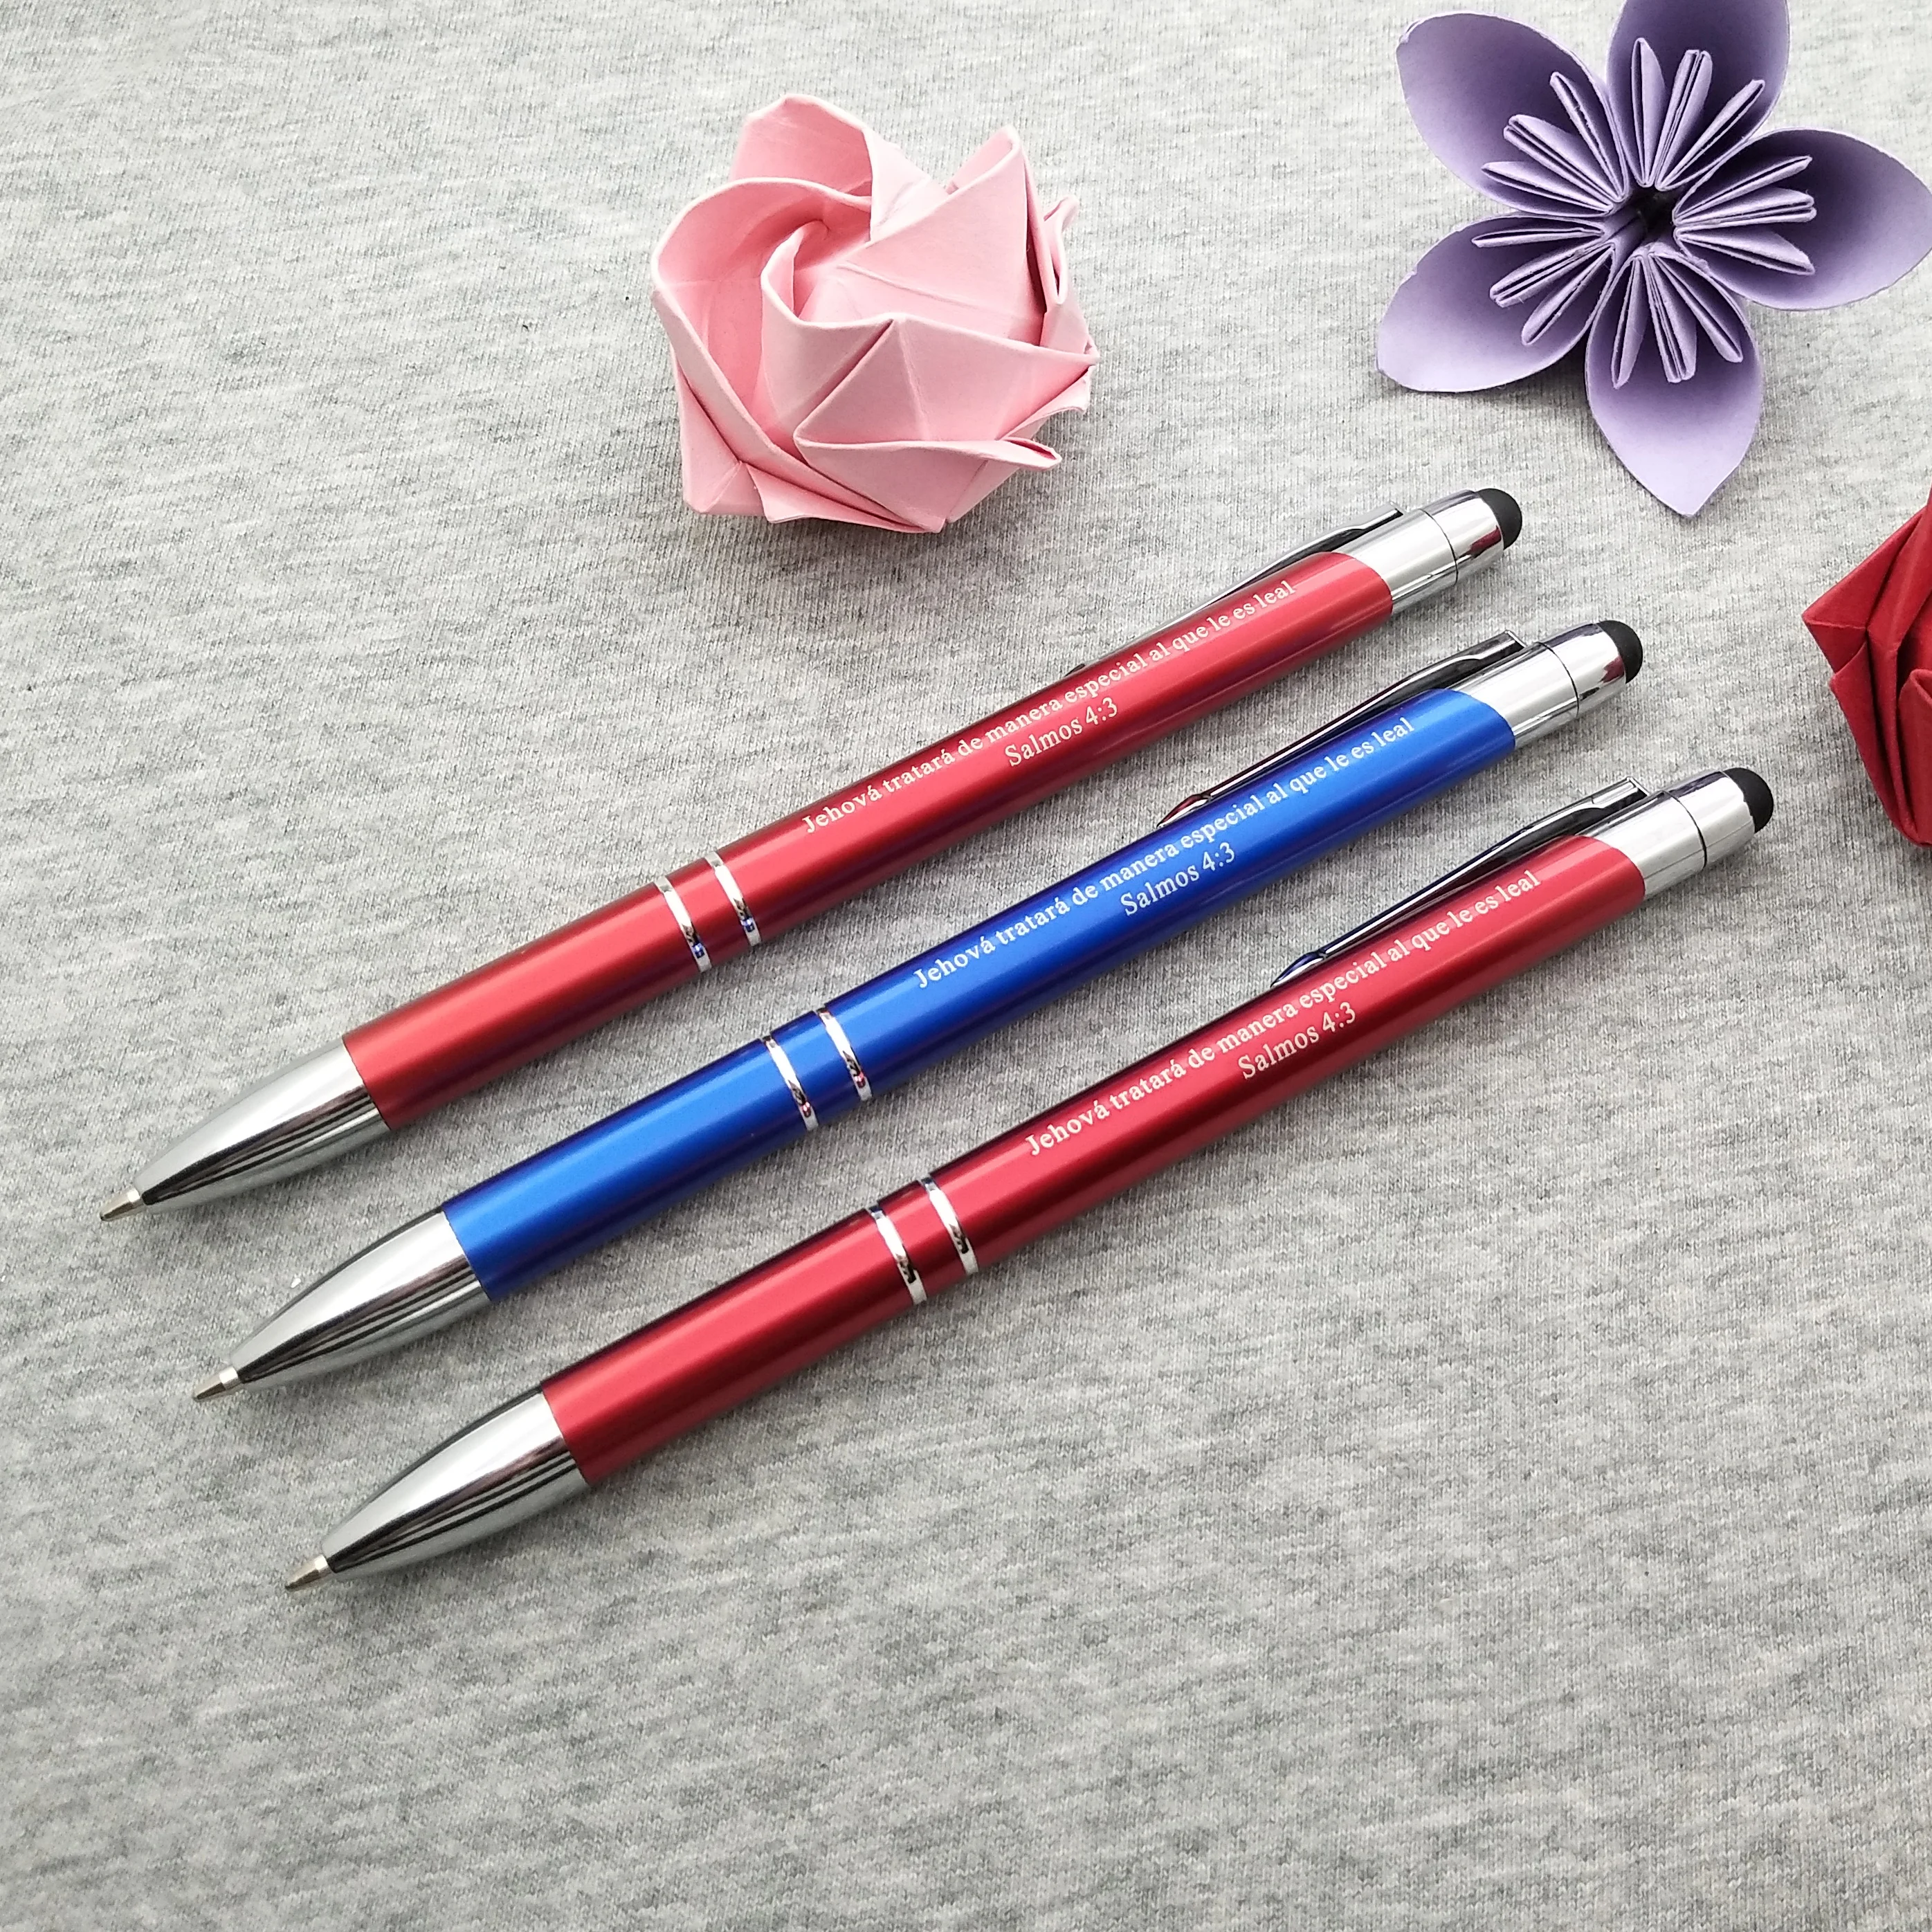 NEW Promotional logo pens for Small business promotional items 80pcs a lot imprinted with your company logo/name.. free shipping